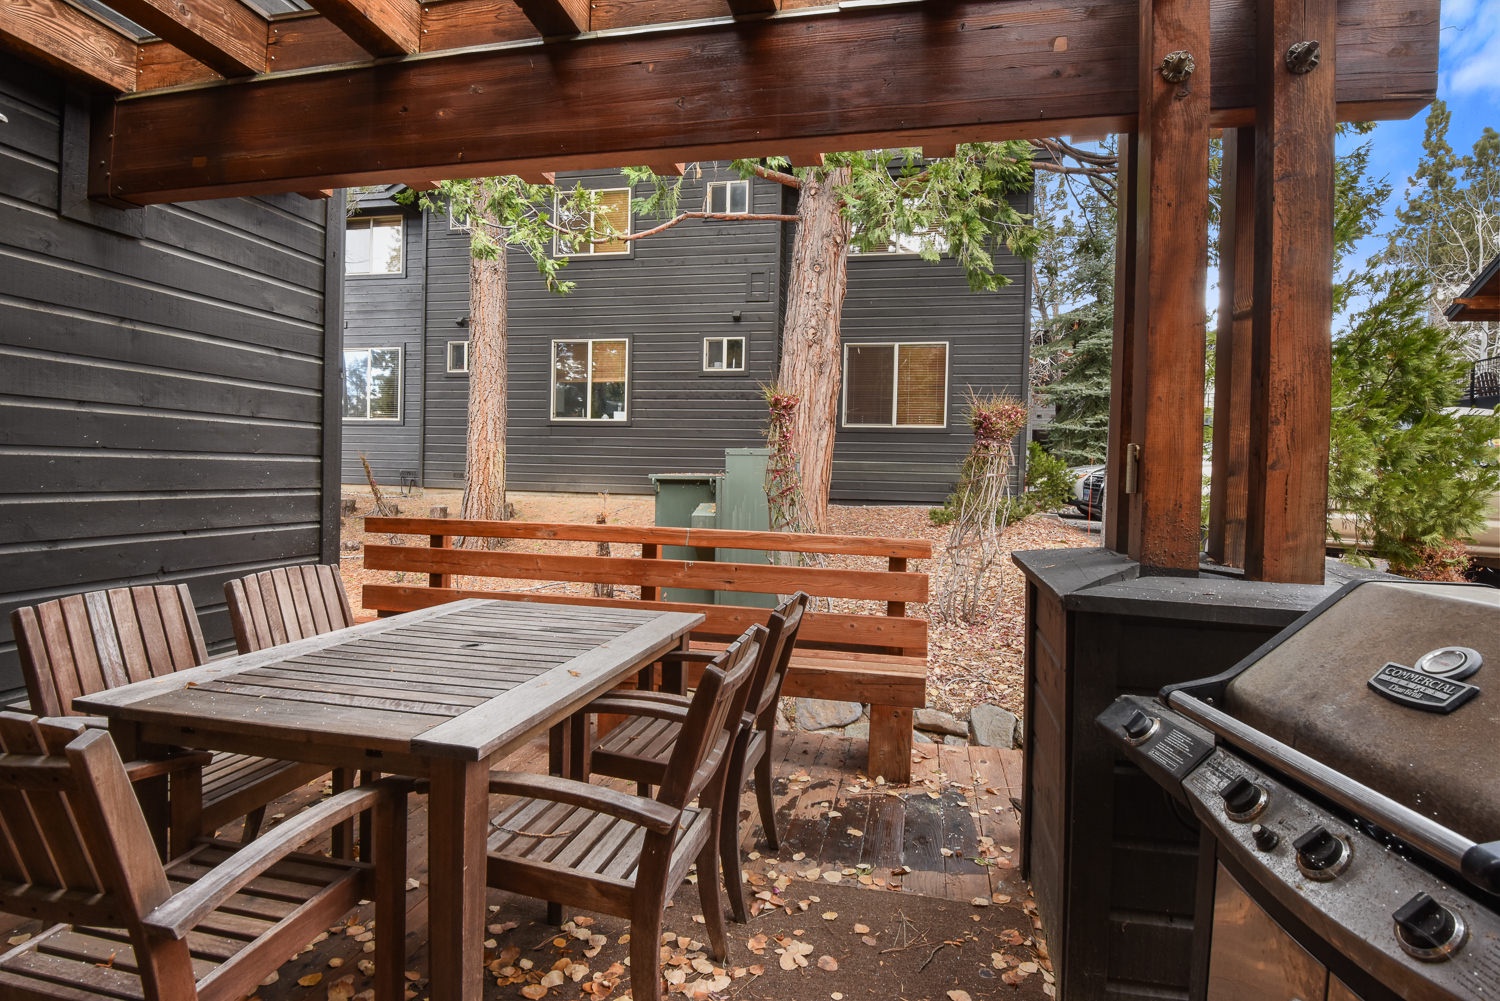 Take in the fresh air on the patio with grill and outdoor seating